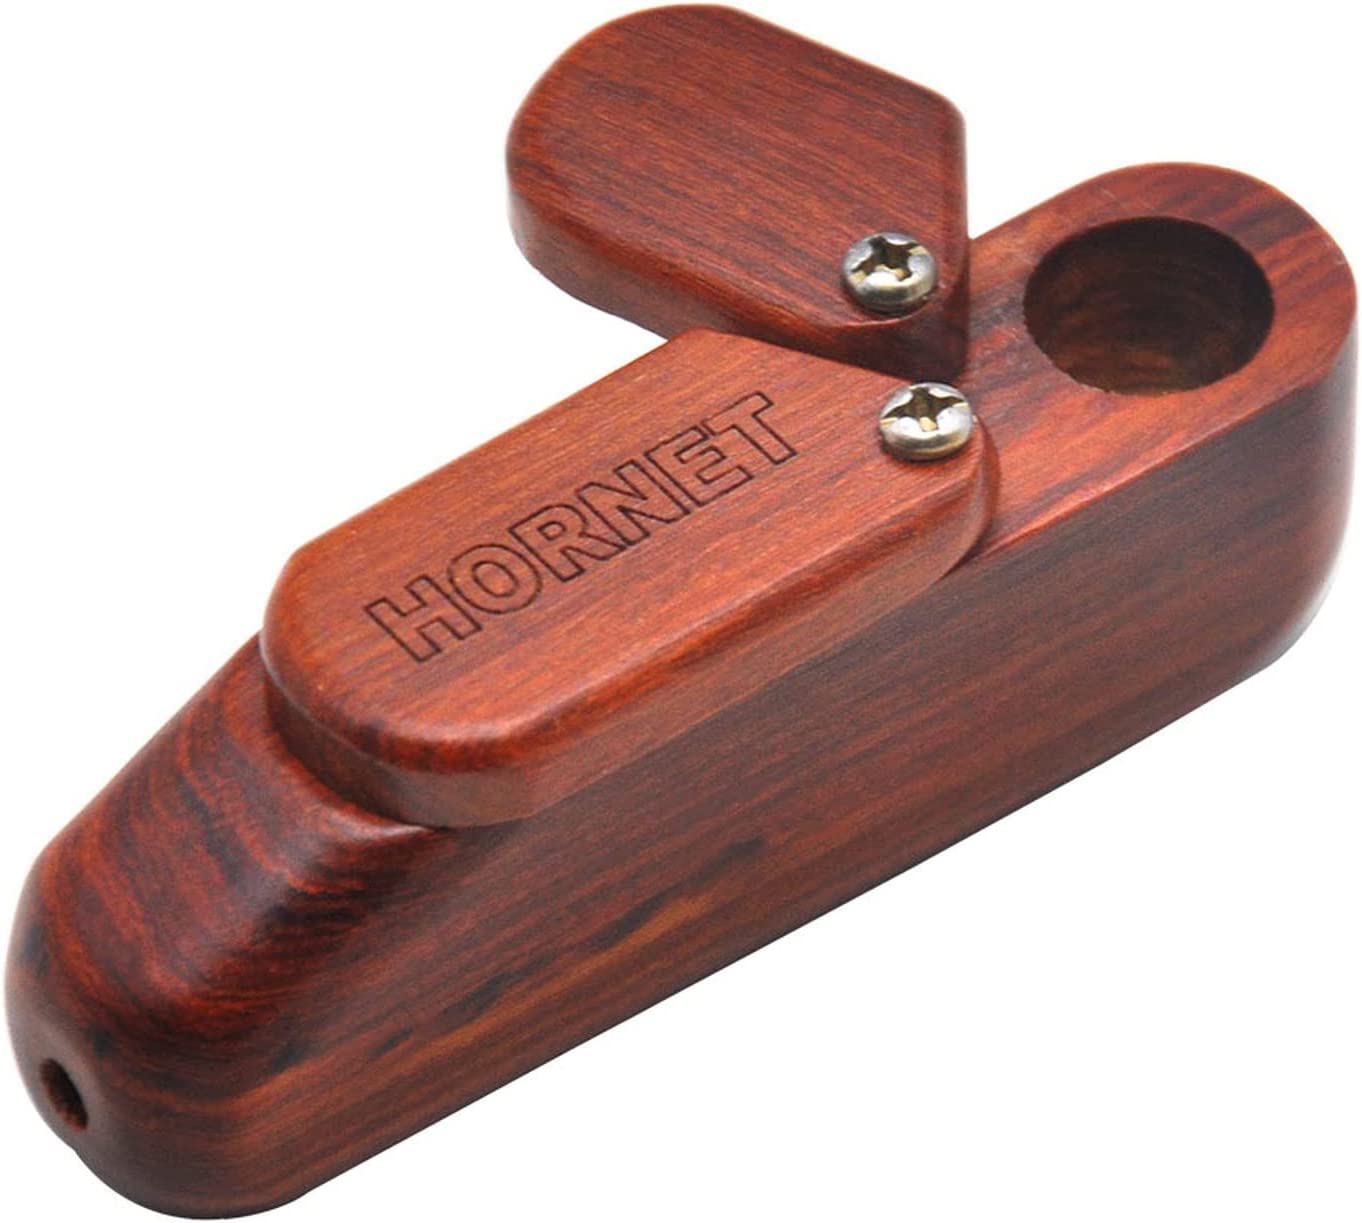 Cannabinthusiast | Eight Practical Gifts for your Favorite Pothead - Hornet Wood Pipe